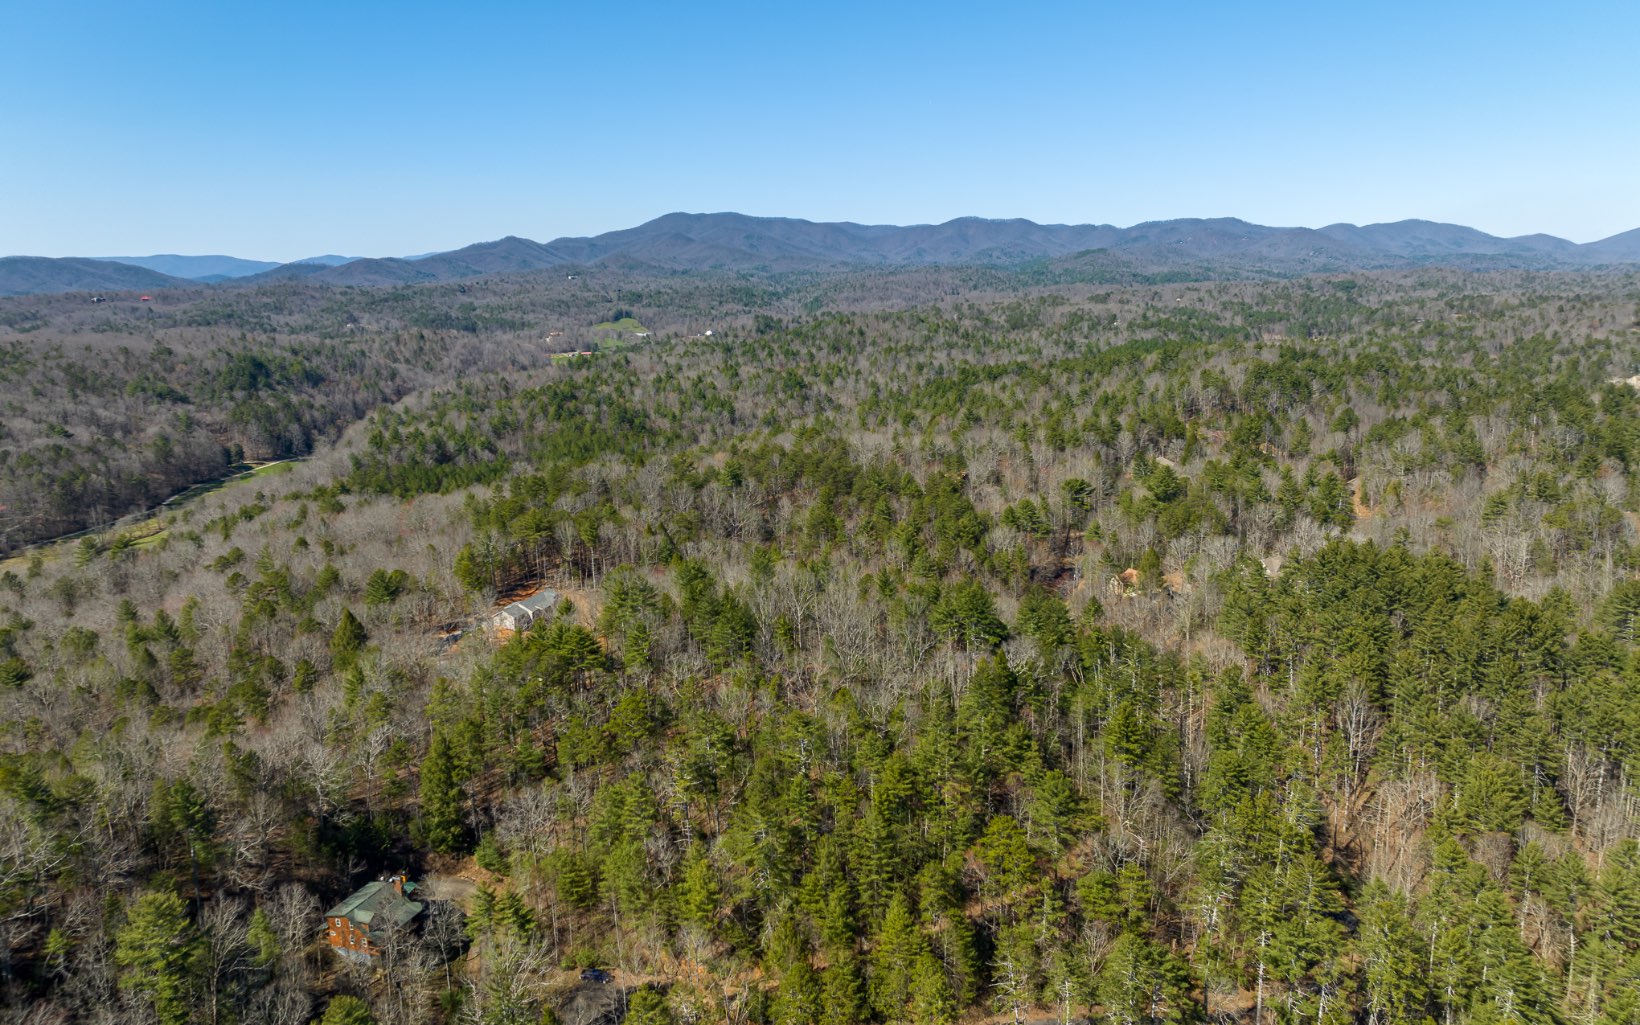 One of the very best MOUNTAIN VIEW lots in Buckhorn Estates! Handpicked by one of the original developers, this lot is cream of the crop. Very private 3.88 acres with long range mountain views of the Rich Mountain Wilderness Area & Chattahoochee National Forest. You have several options for the perfect homesite; includes 3 lots, so you may choose to build 1 to 3 homes. The driveway is already in place. Conveniently located between Blue Ridge and Ellijay with all paved roads, high speed internet, cable TV, & low HOA fees of only $225 per lot per year. Buckhorn Estates offers a beautiful river park, an 8 acre fishing lake and the pleasure of driving your golf cart over to Whitepath Golf Course. (18 hole GOLF COURSE open to the public.) This community has everything you enjoy about the mountains and is only 10 minutes to town. *Gilmer County offers "no school tax" for full time residents over the age of 65.*